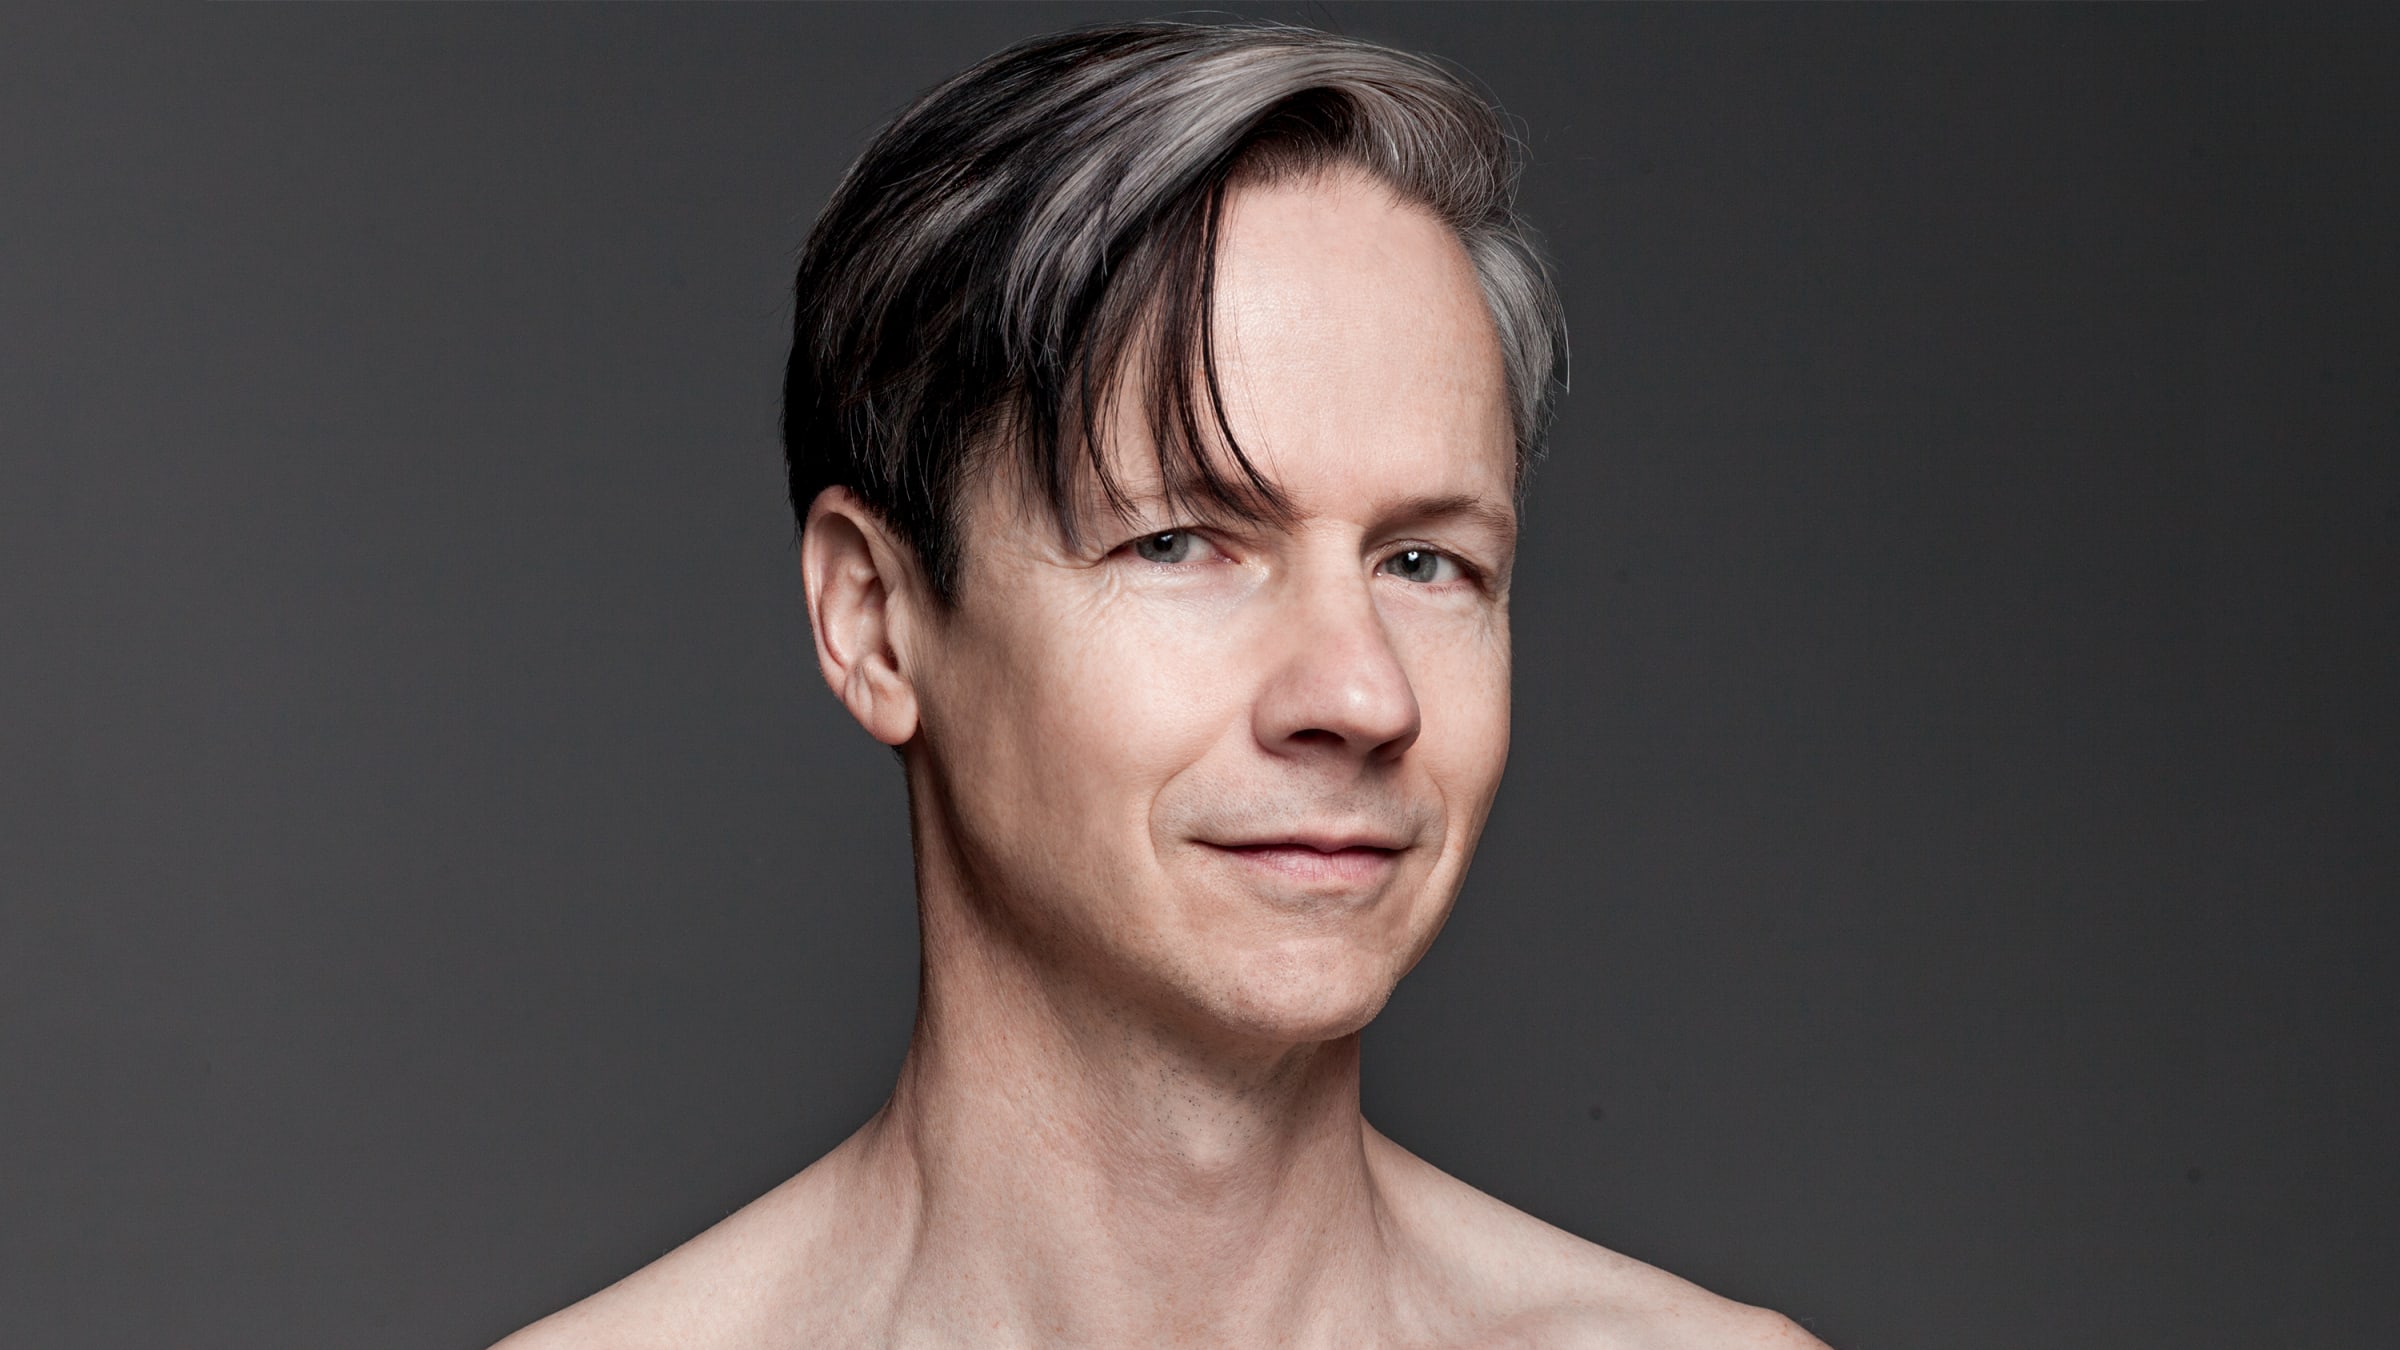 Forced Bisexual Slave Porn - After Hedwig: John Cameron Mitchell on His Father's Bisexuality, His Tragic  'Anthem,' and LGBT Life Under Trump